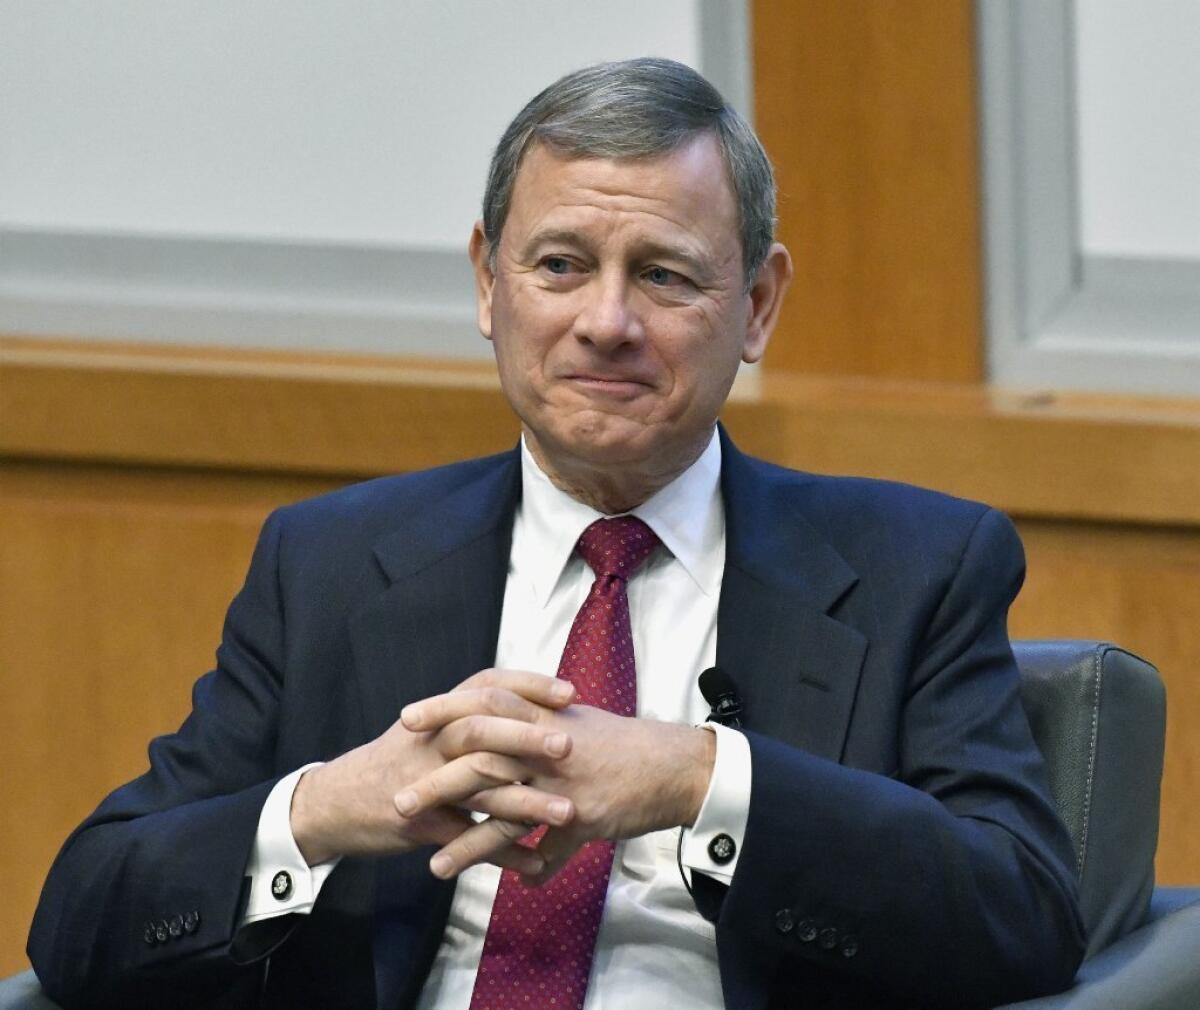 Chief Justice John G. Roberts Jr. wrote the majority opinion in the political clothing case.